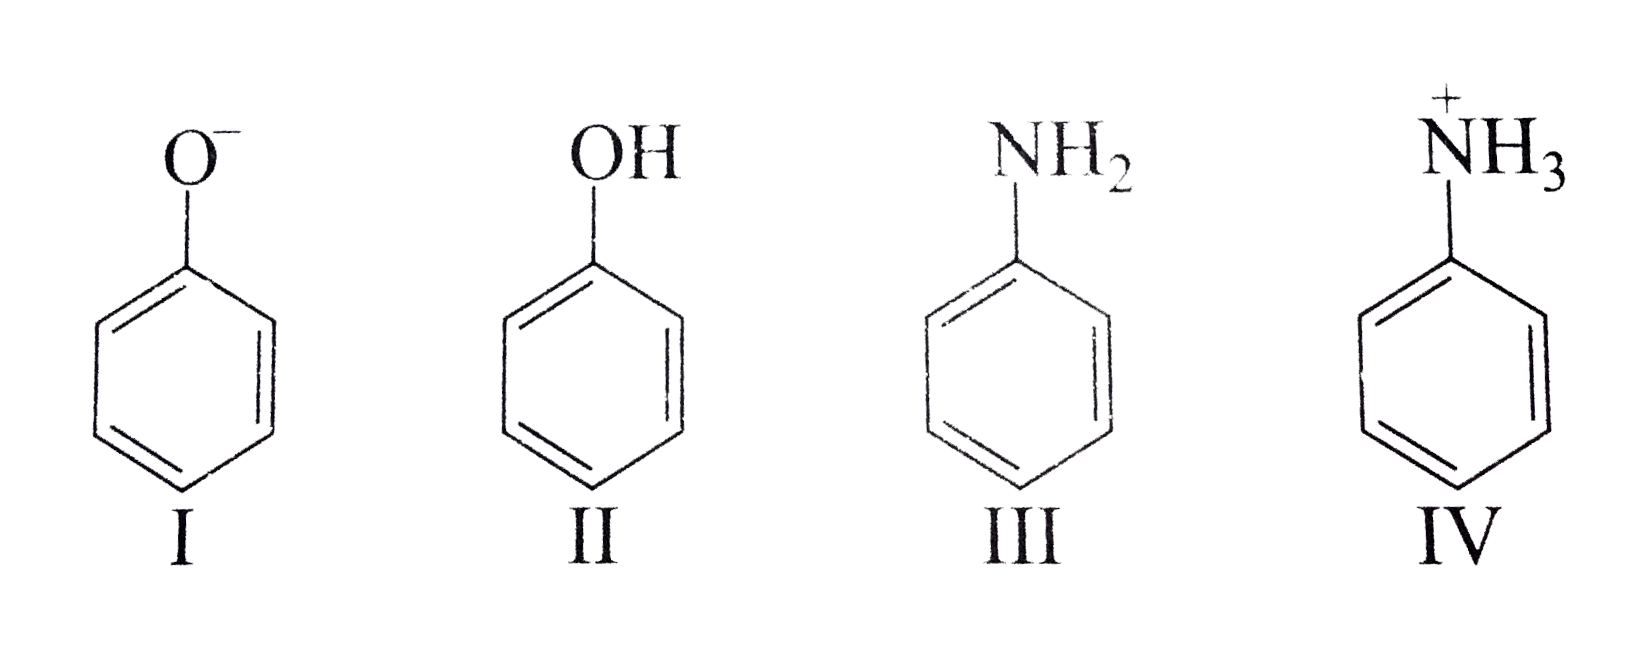 Coupling of diazonium salts of following takes place in the order